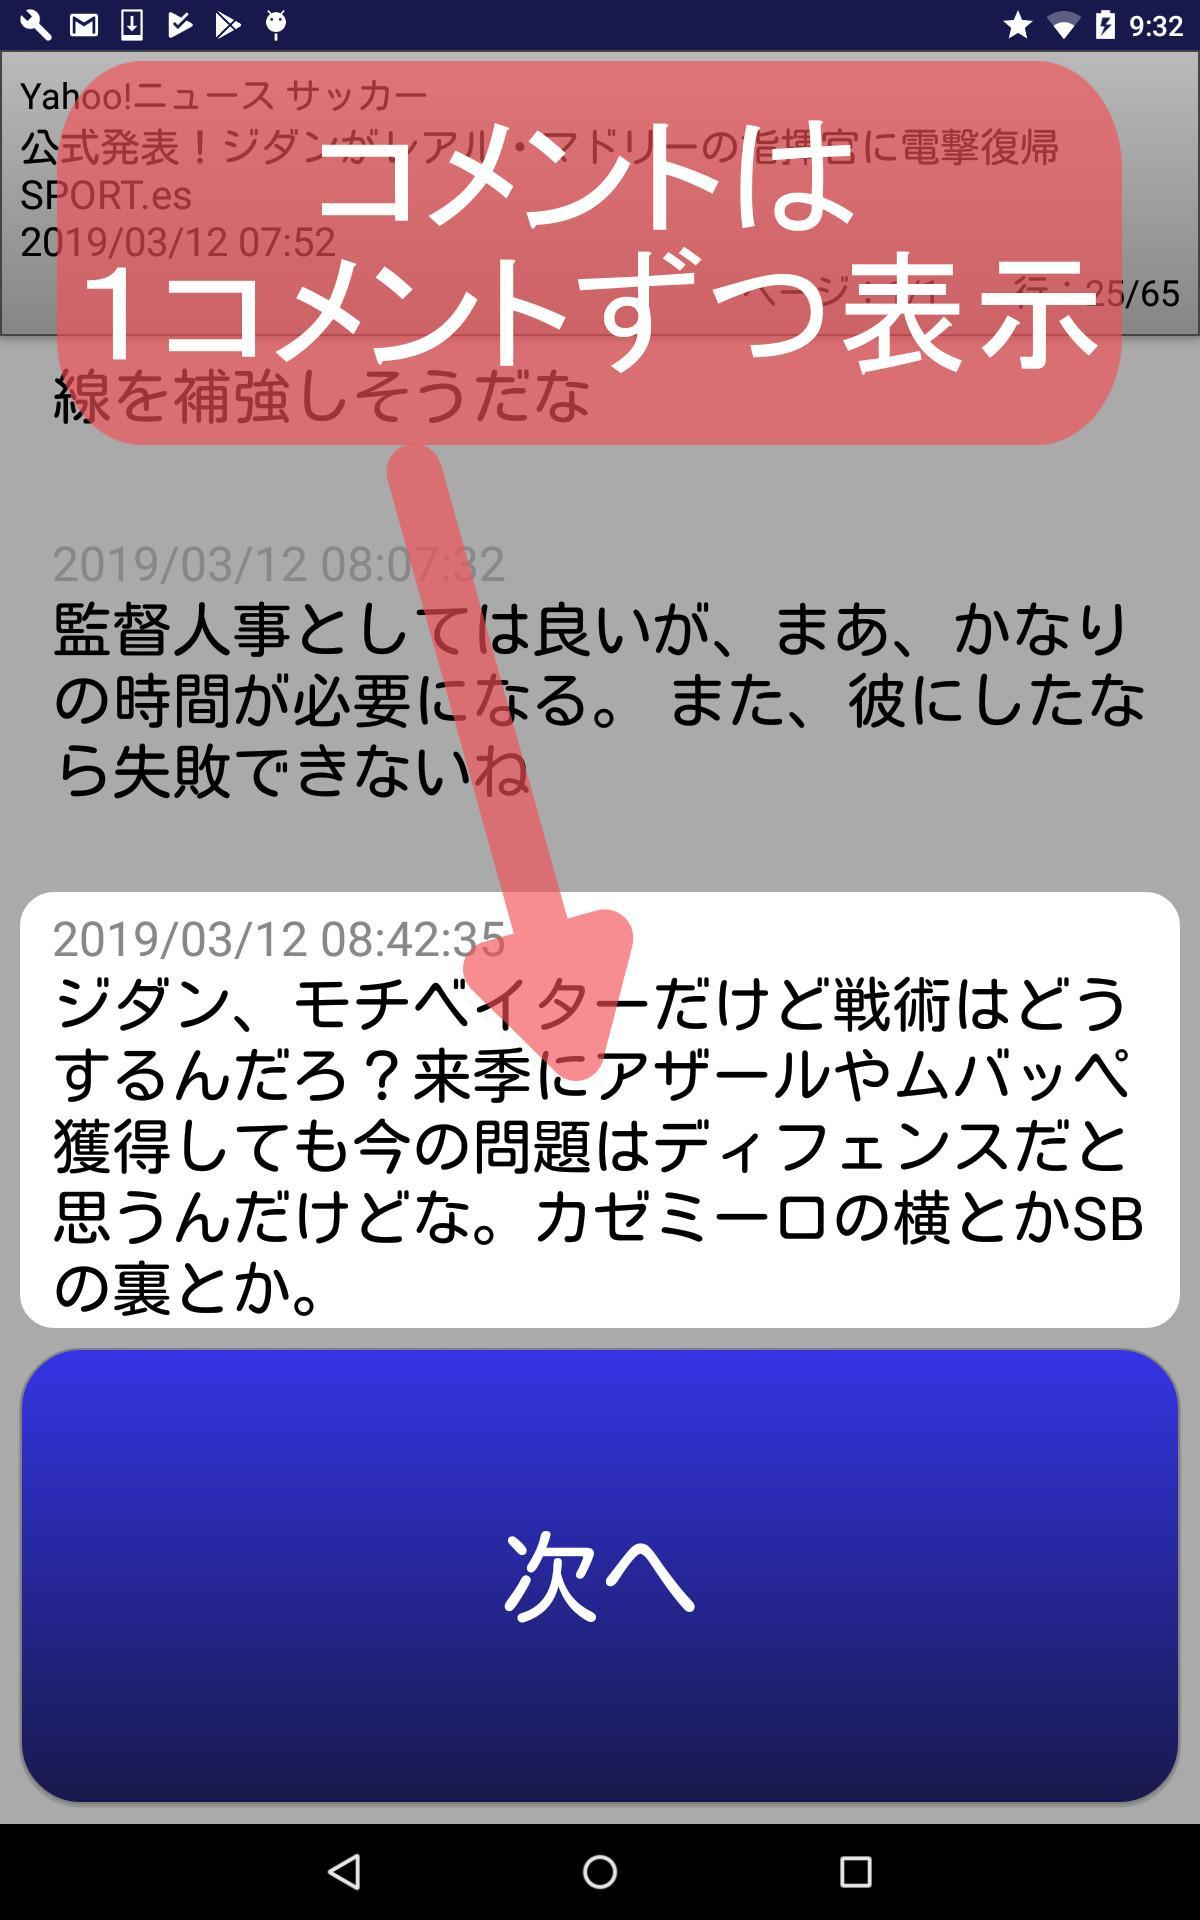 Clion クリックだけで文章を読み進める 新タイプのニュース 小説 まとめreader For Android Apk Download